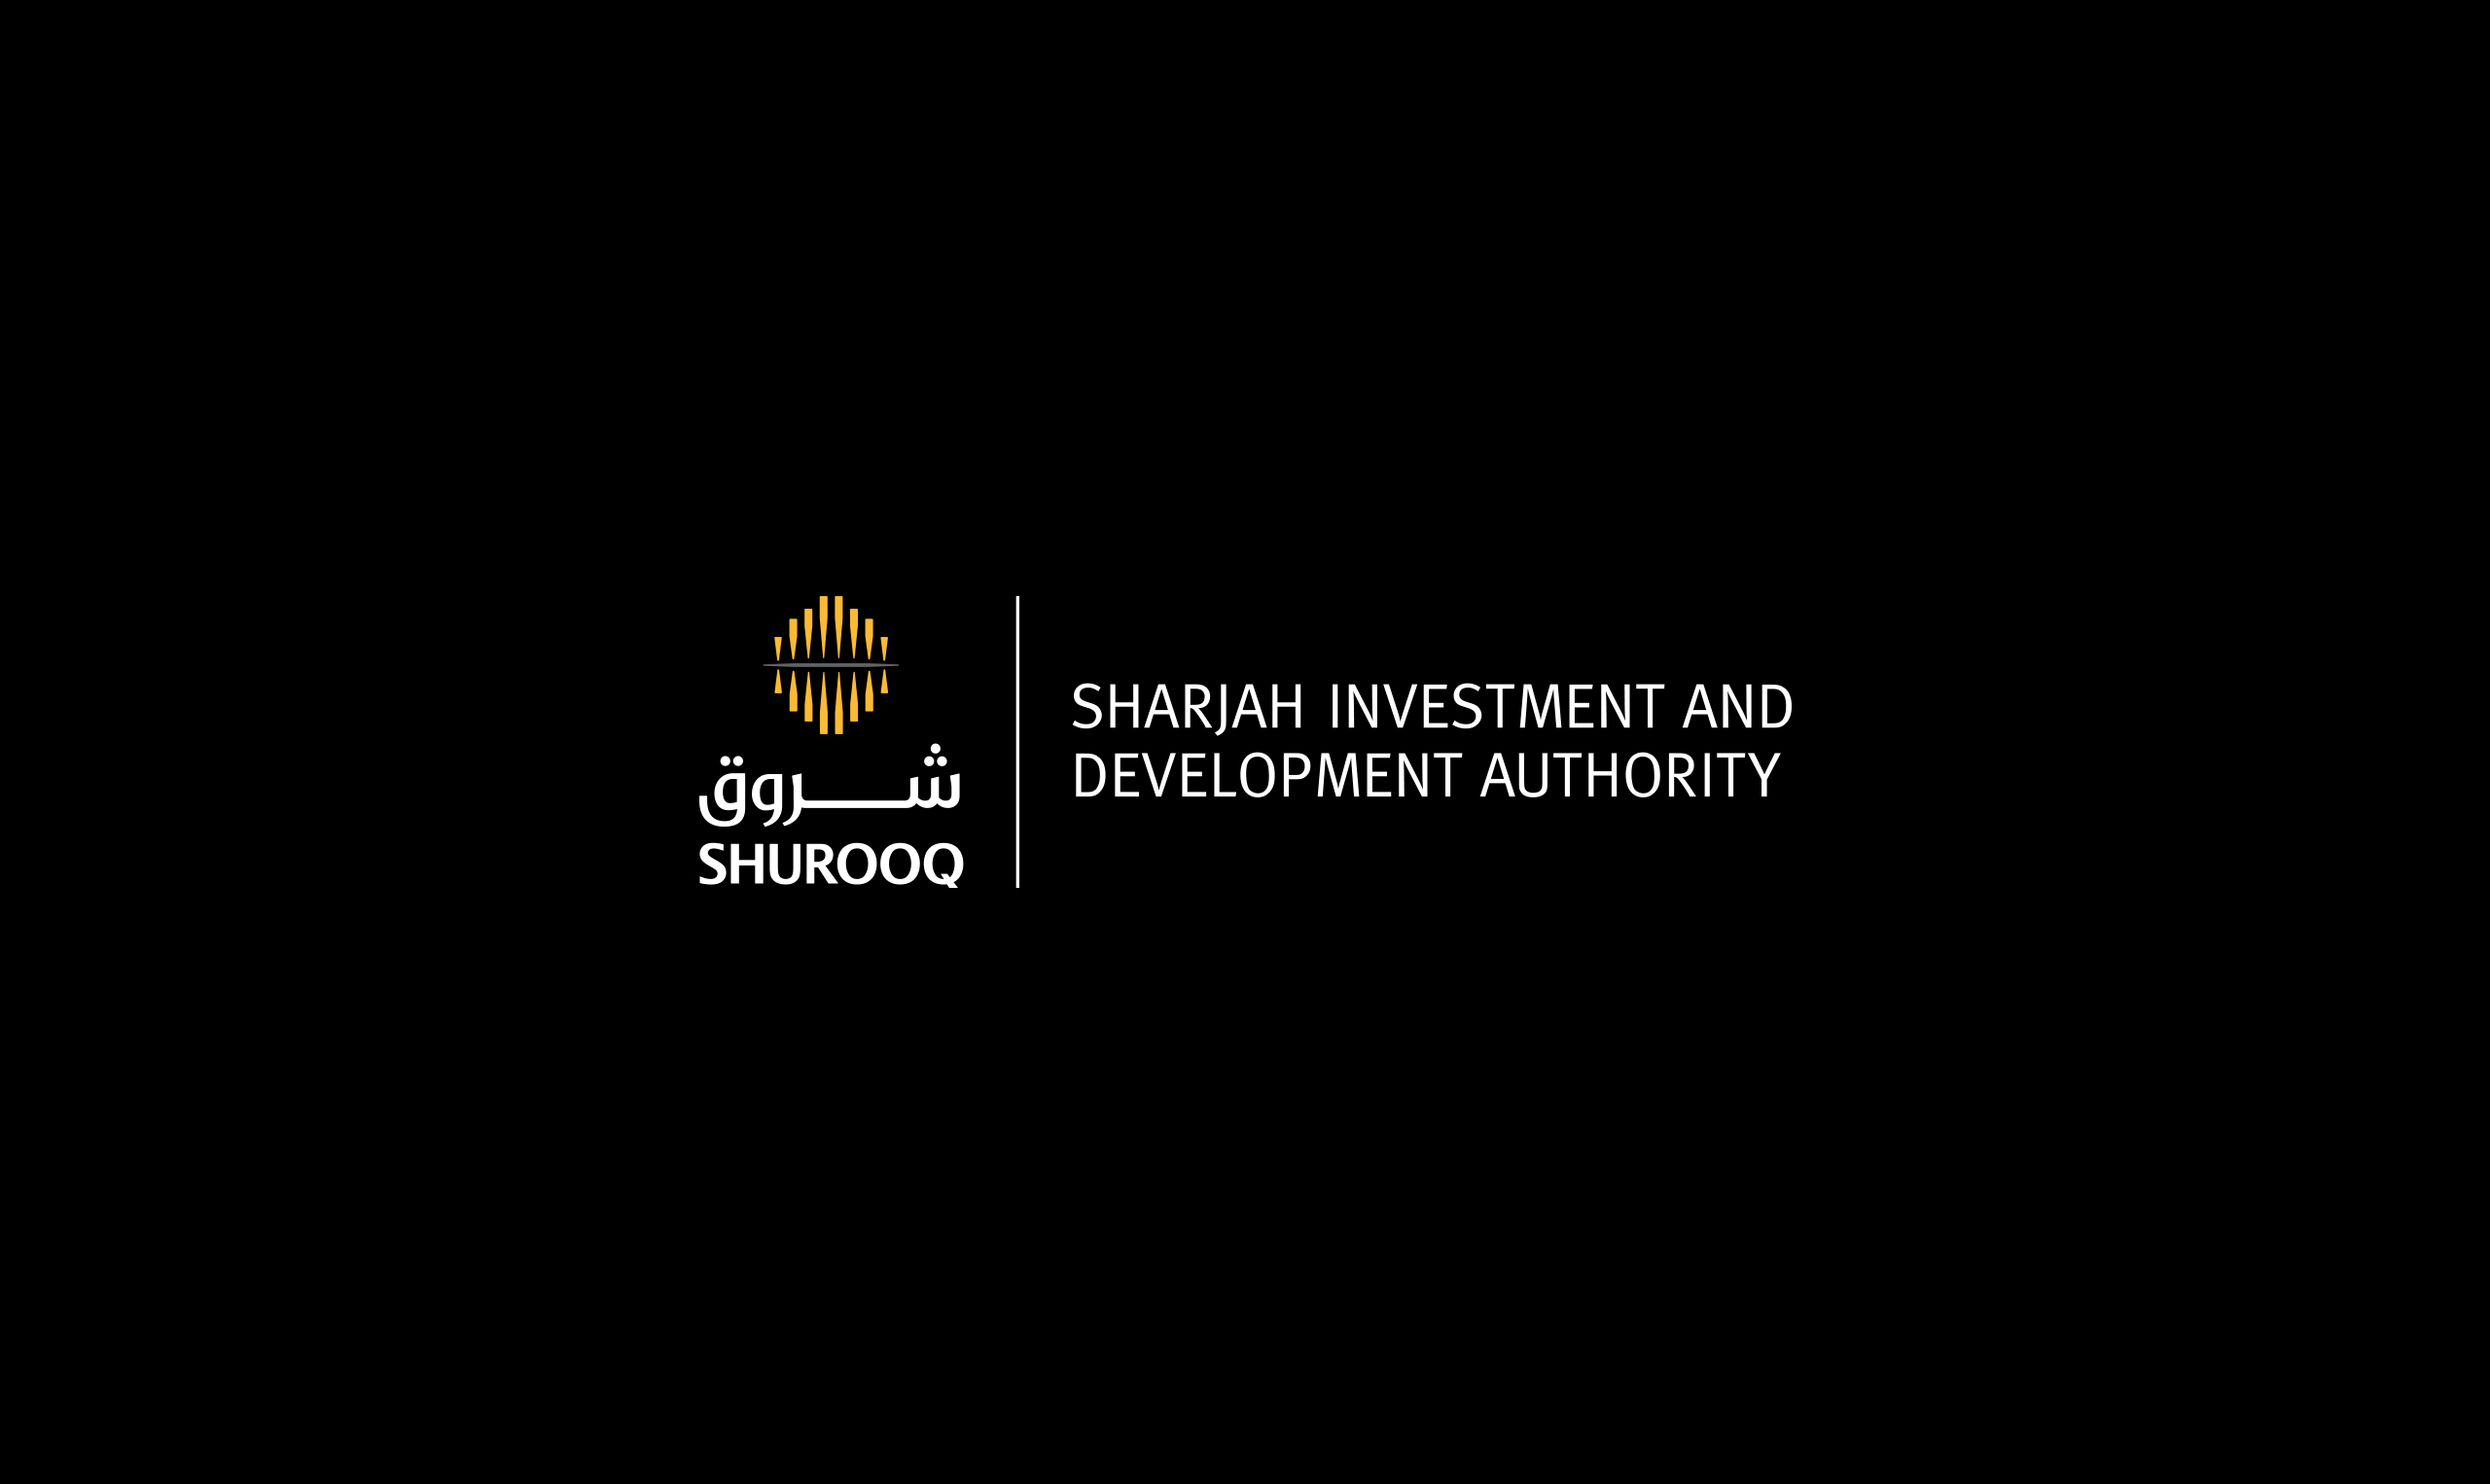 The logo for Sharjah Investment Authority, a brand extension.